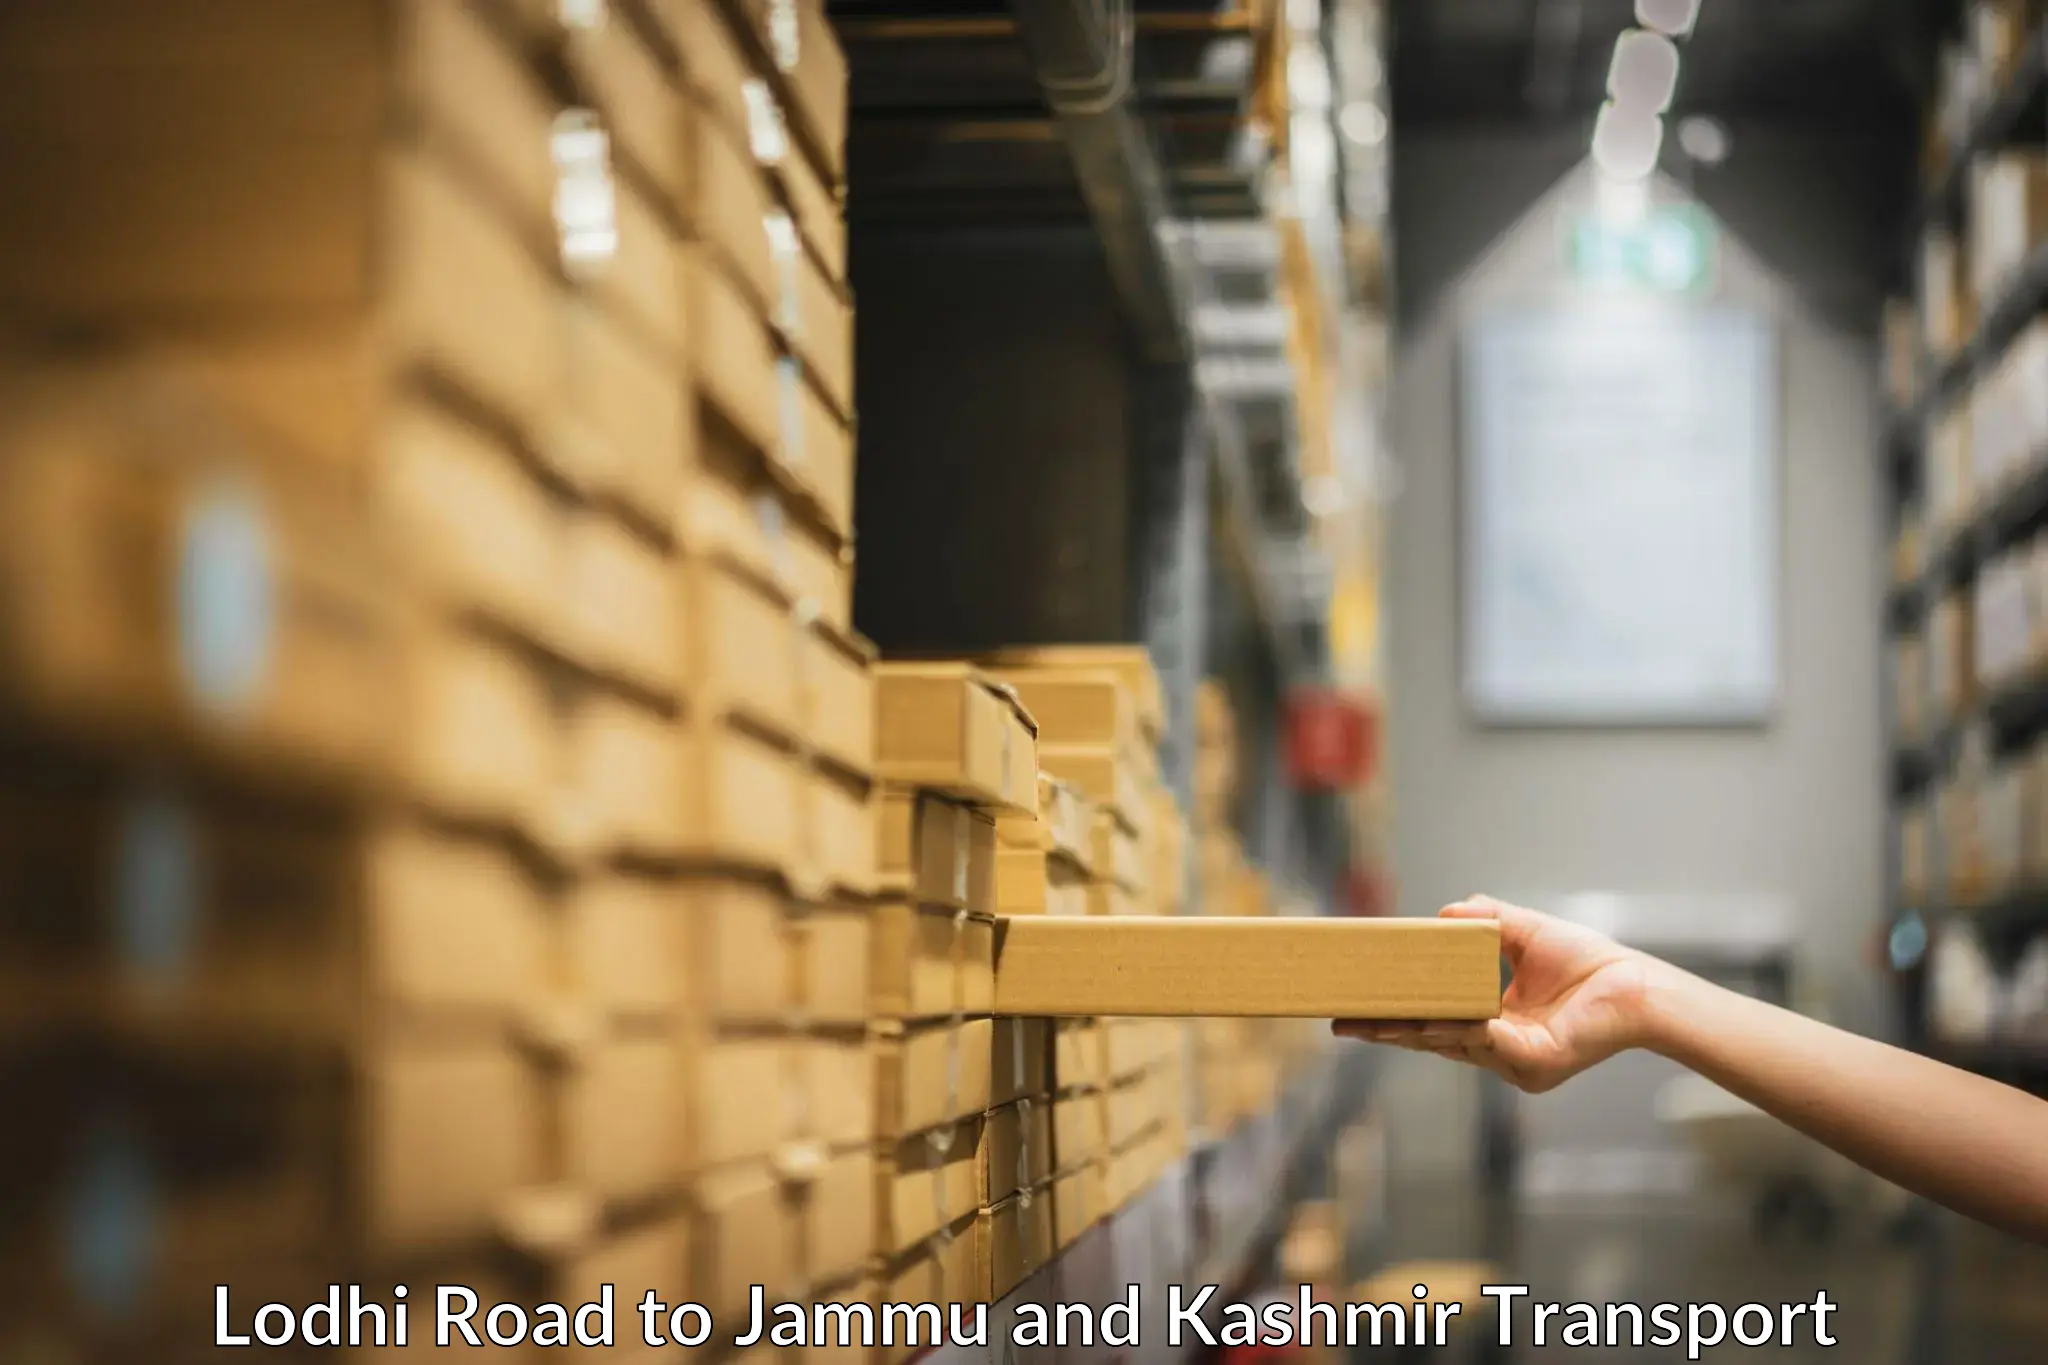 Express transport services Lodhi Road to Jammu and Kashmir